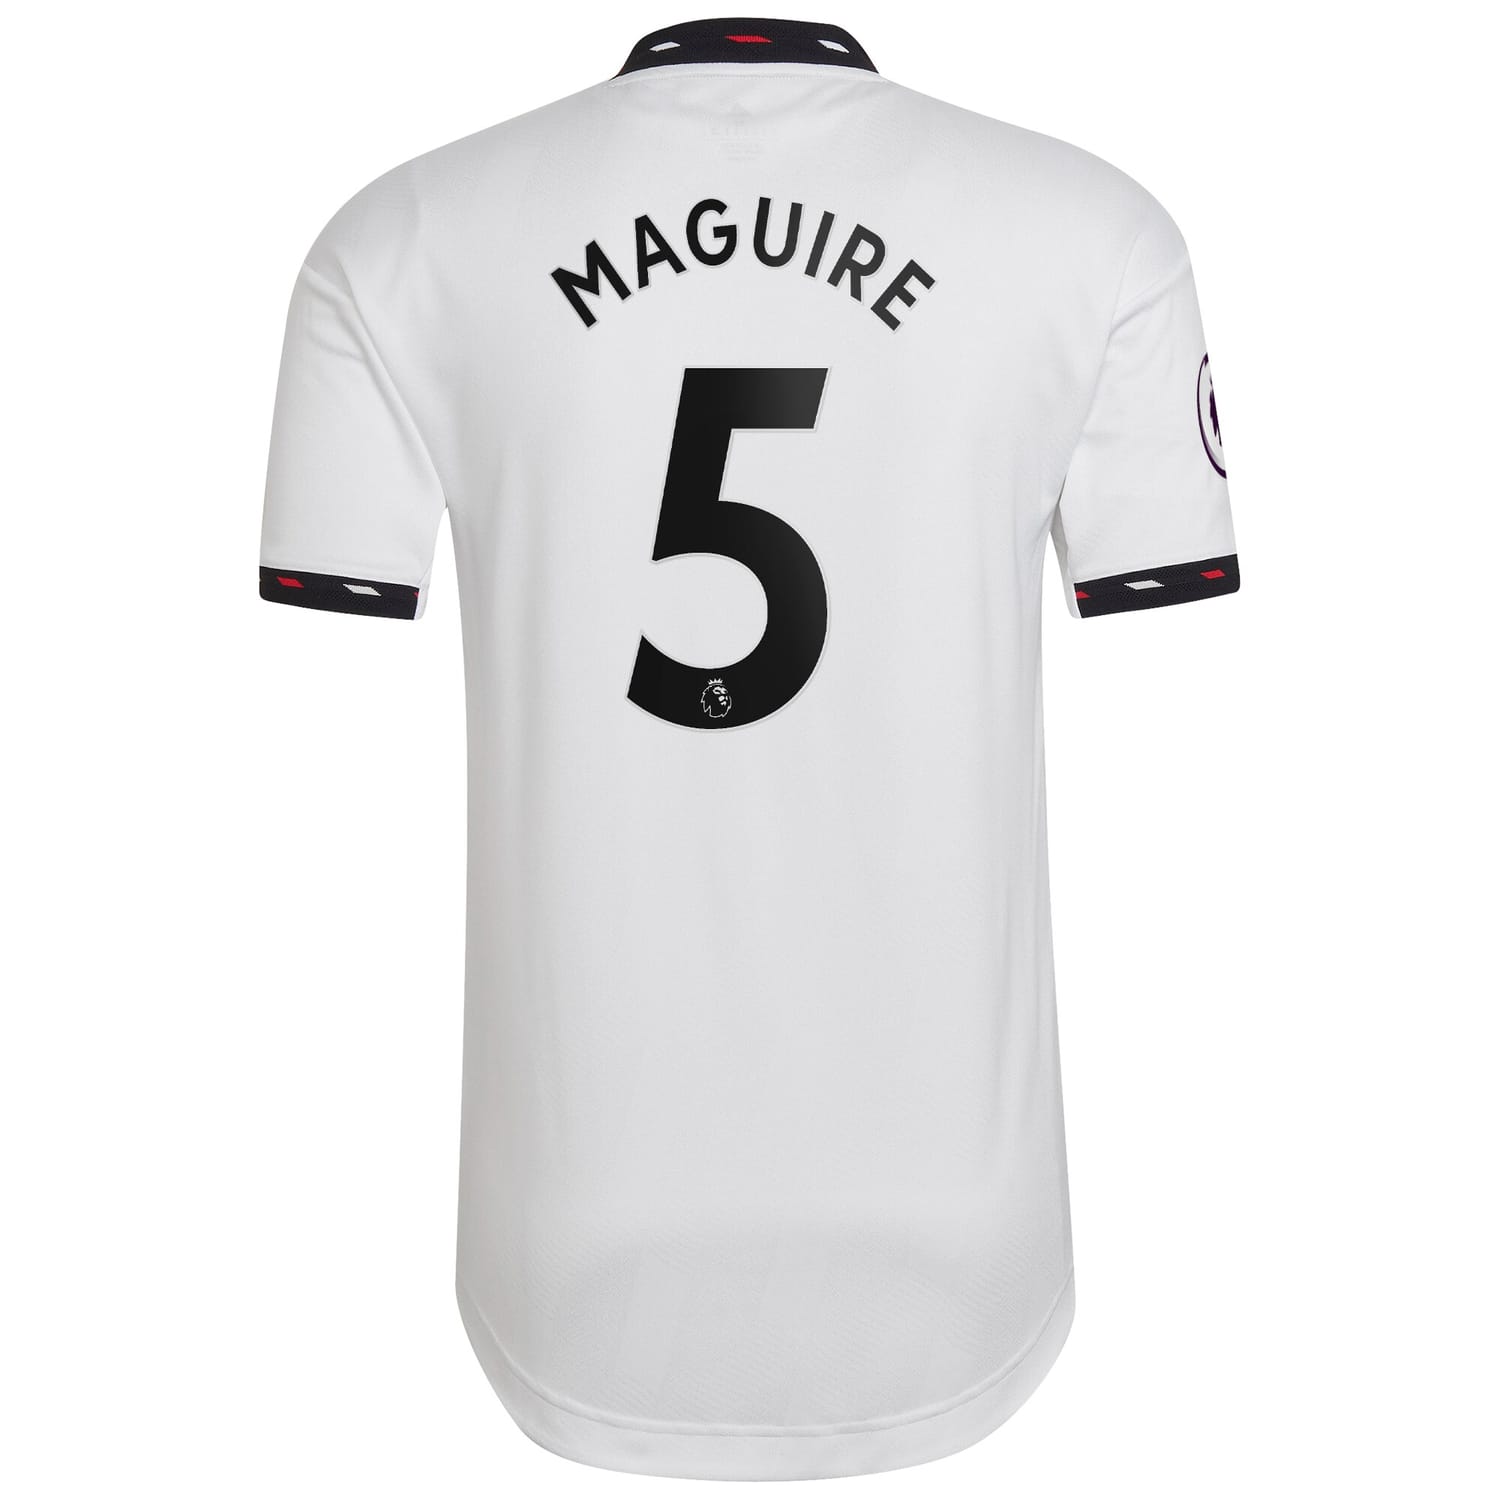 Premier League Manchester United Away Authentic Jersey Shirt White 2022-23 player Harry Maguire printing for Men